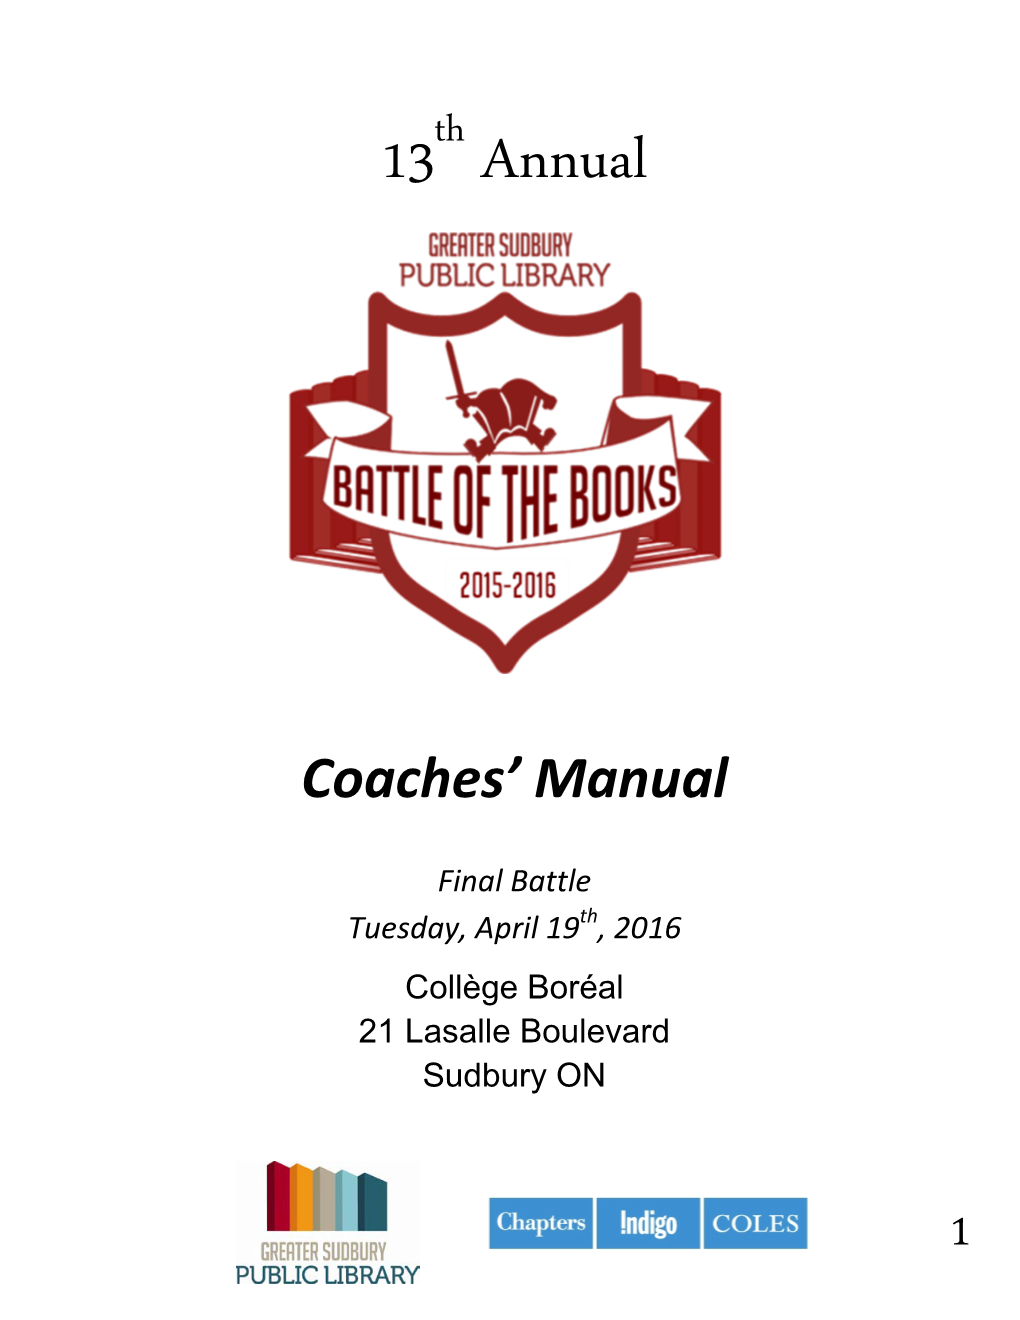 Battle of the Books Coaches Manual 2015-2016